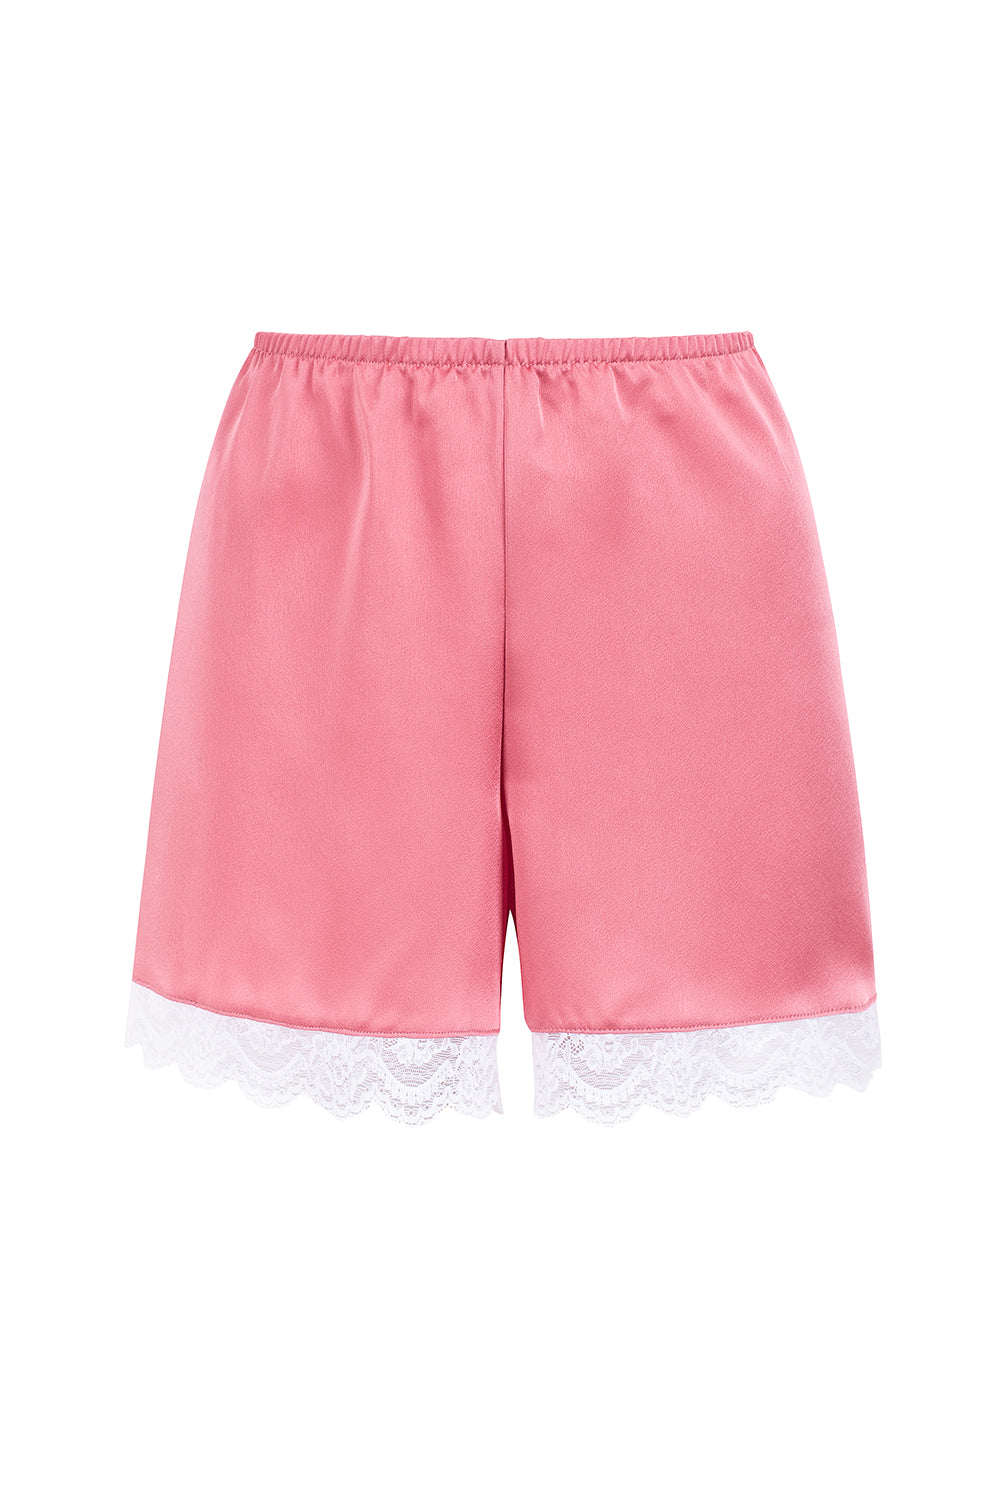 PINK SATIN &amp; LACE SHORTS (OUT OF STOCK)